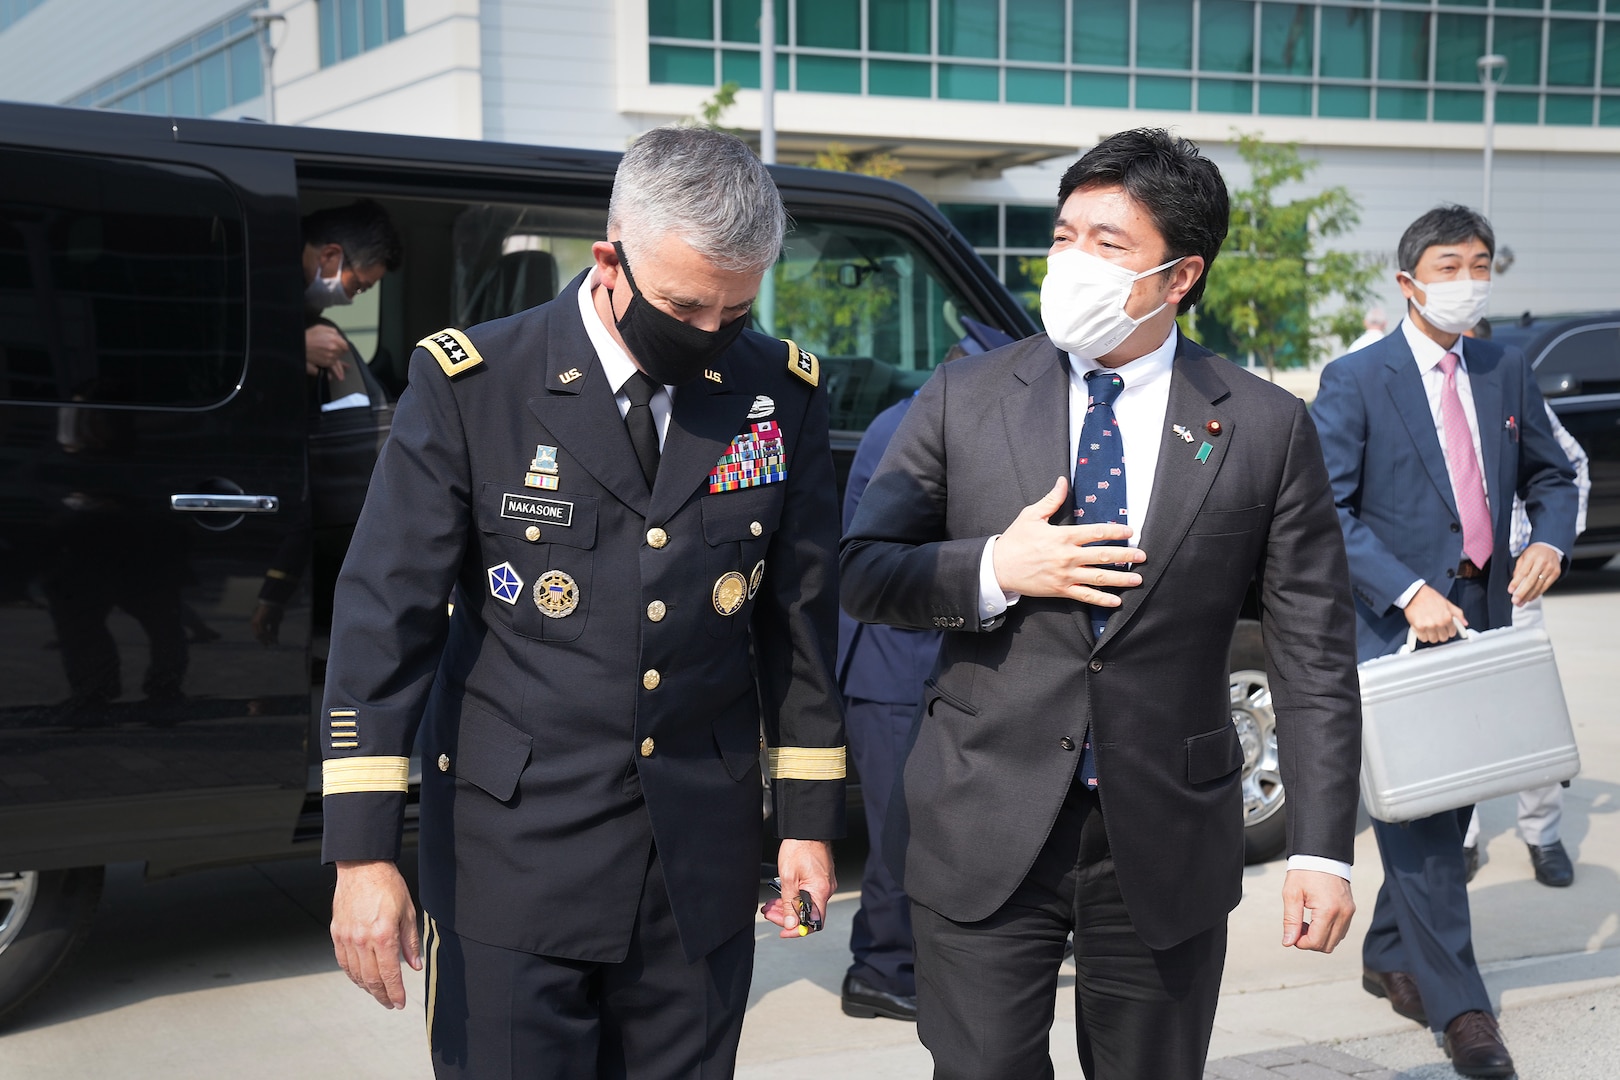 U.S. Army Gen. Paul M. Nakasone, U.S. Cyber Command commander and National Security Agency director, greets the Honorable Yasuhide Nakayama, Japan Ministry of Defense, State Minister of Defense, at Fort George G. Meade, Md., Aug. 9, 2021.